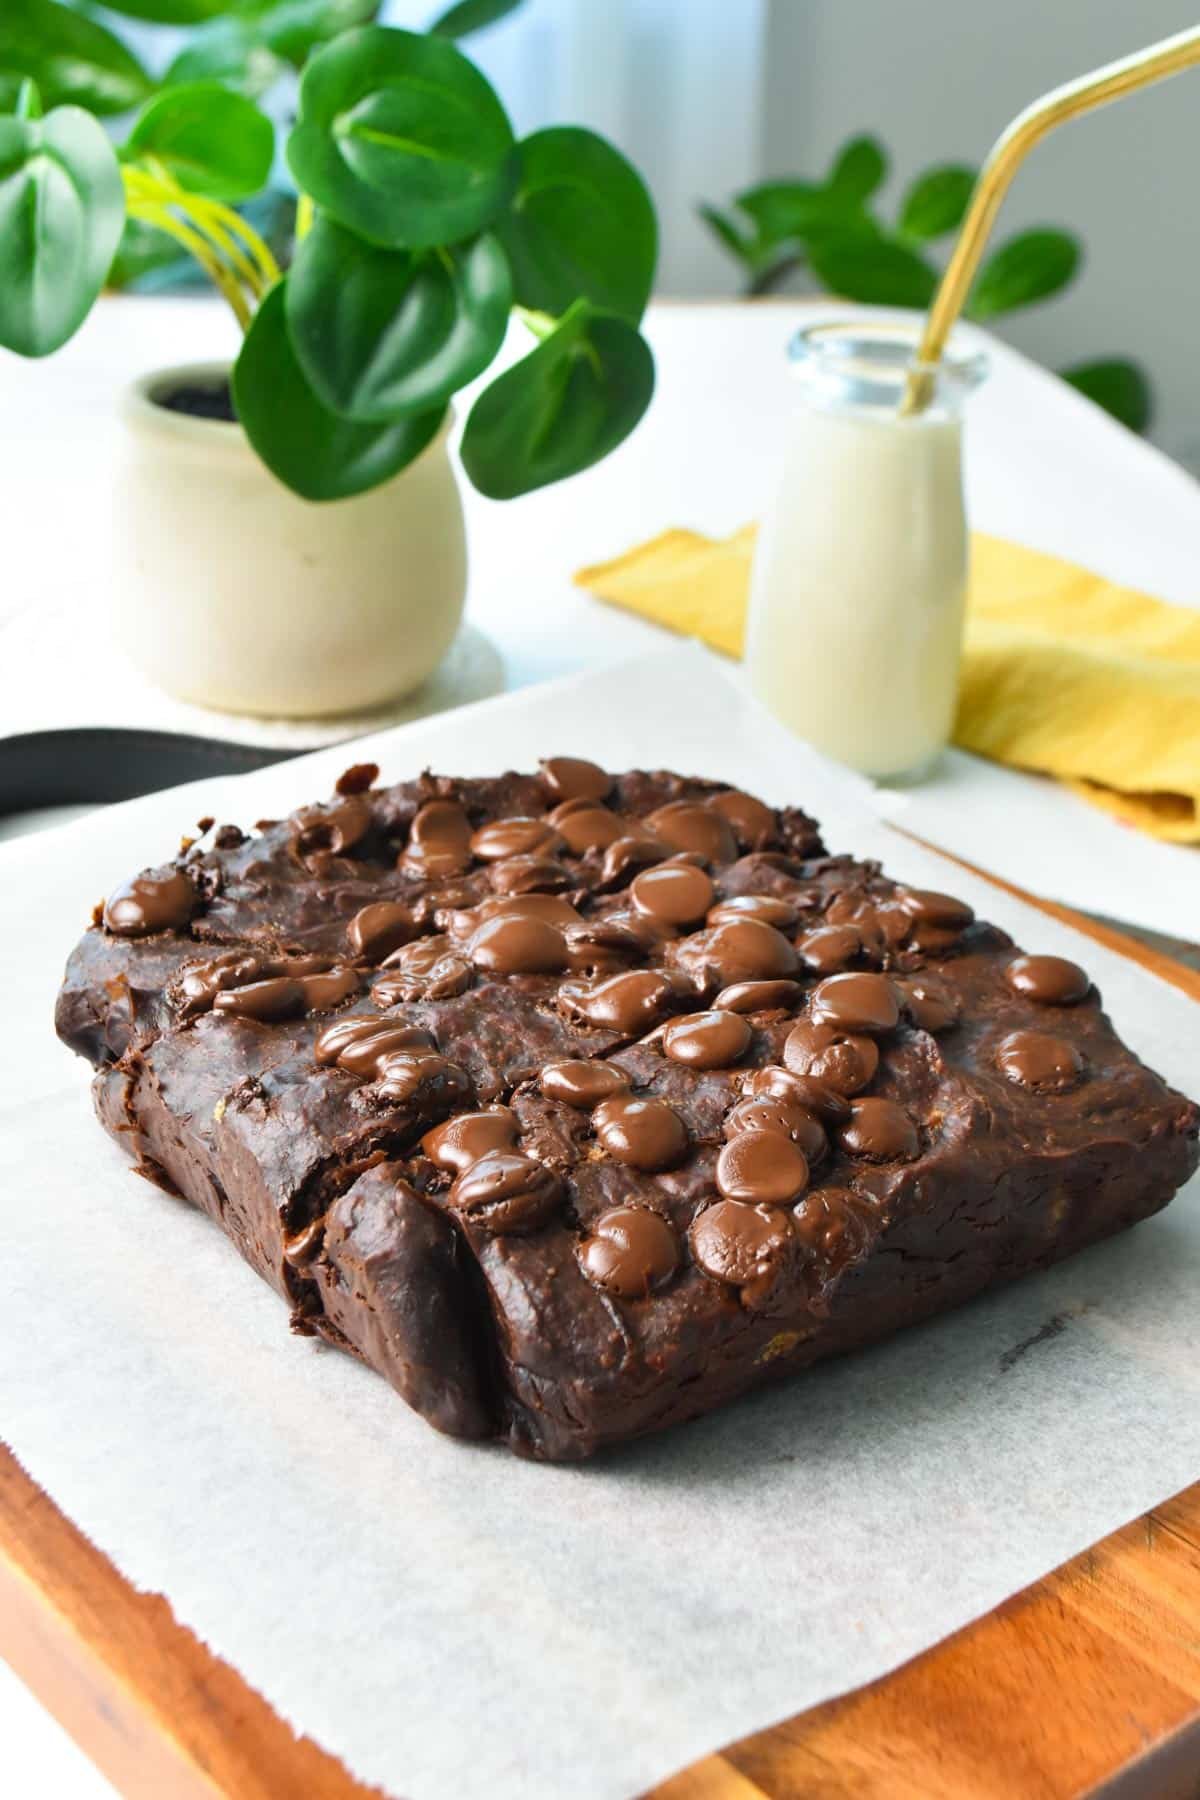 a healthy banana brownies on a wooden board and a green plant in the background with a glass of milk